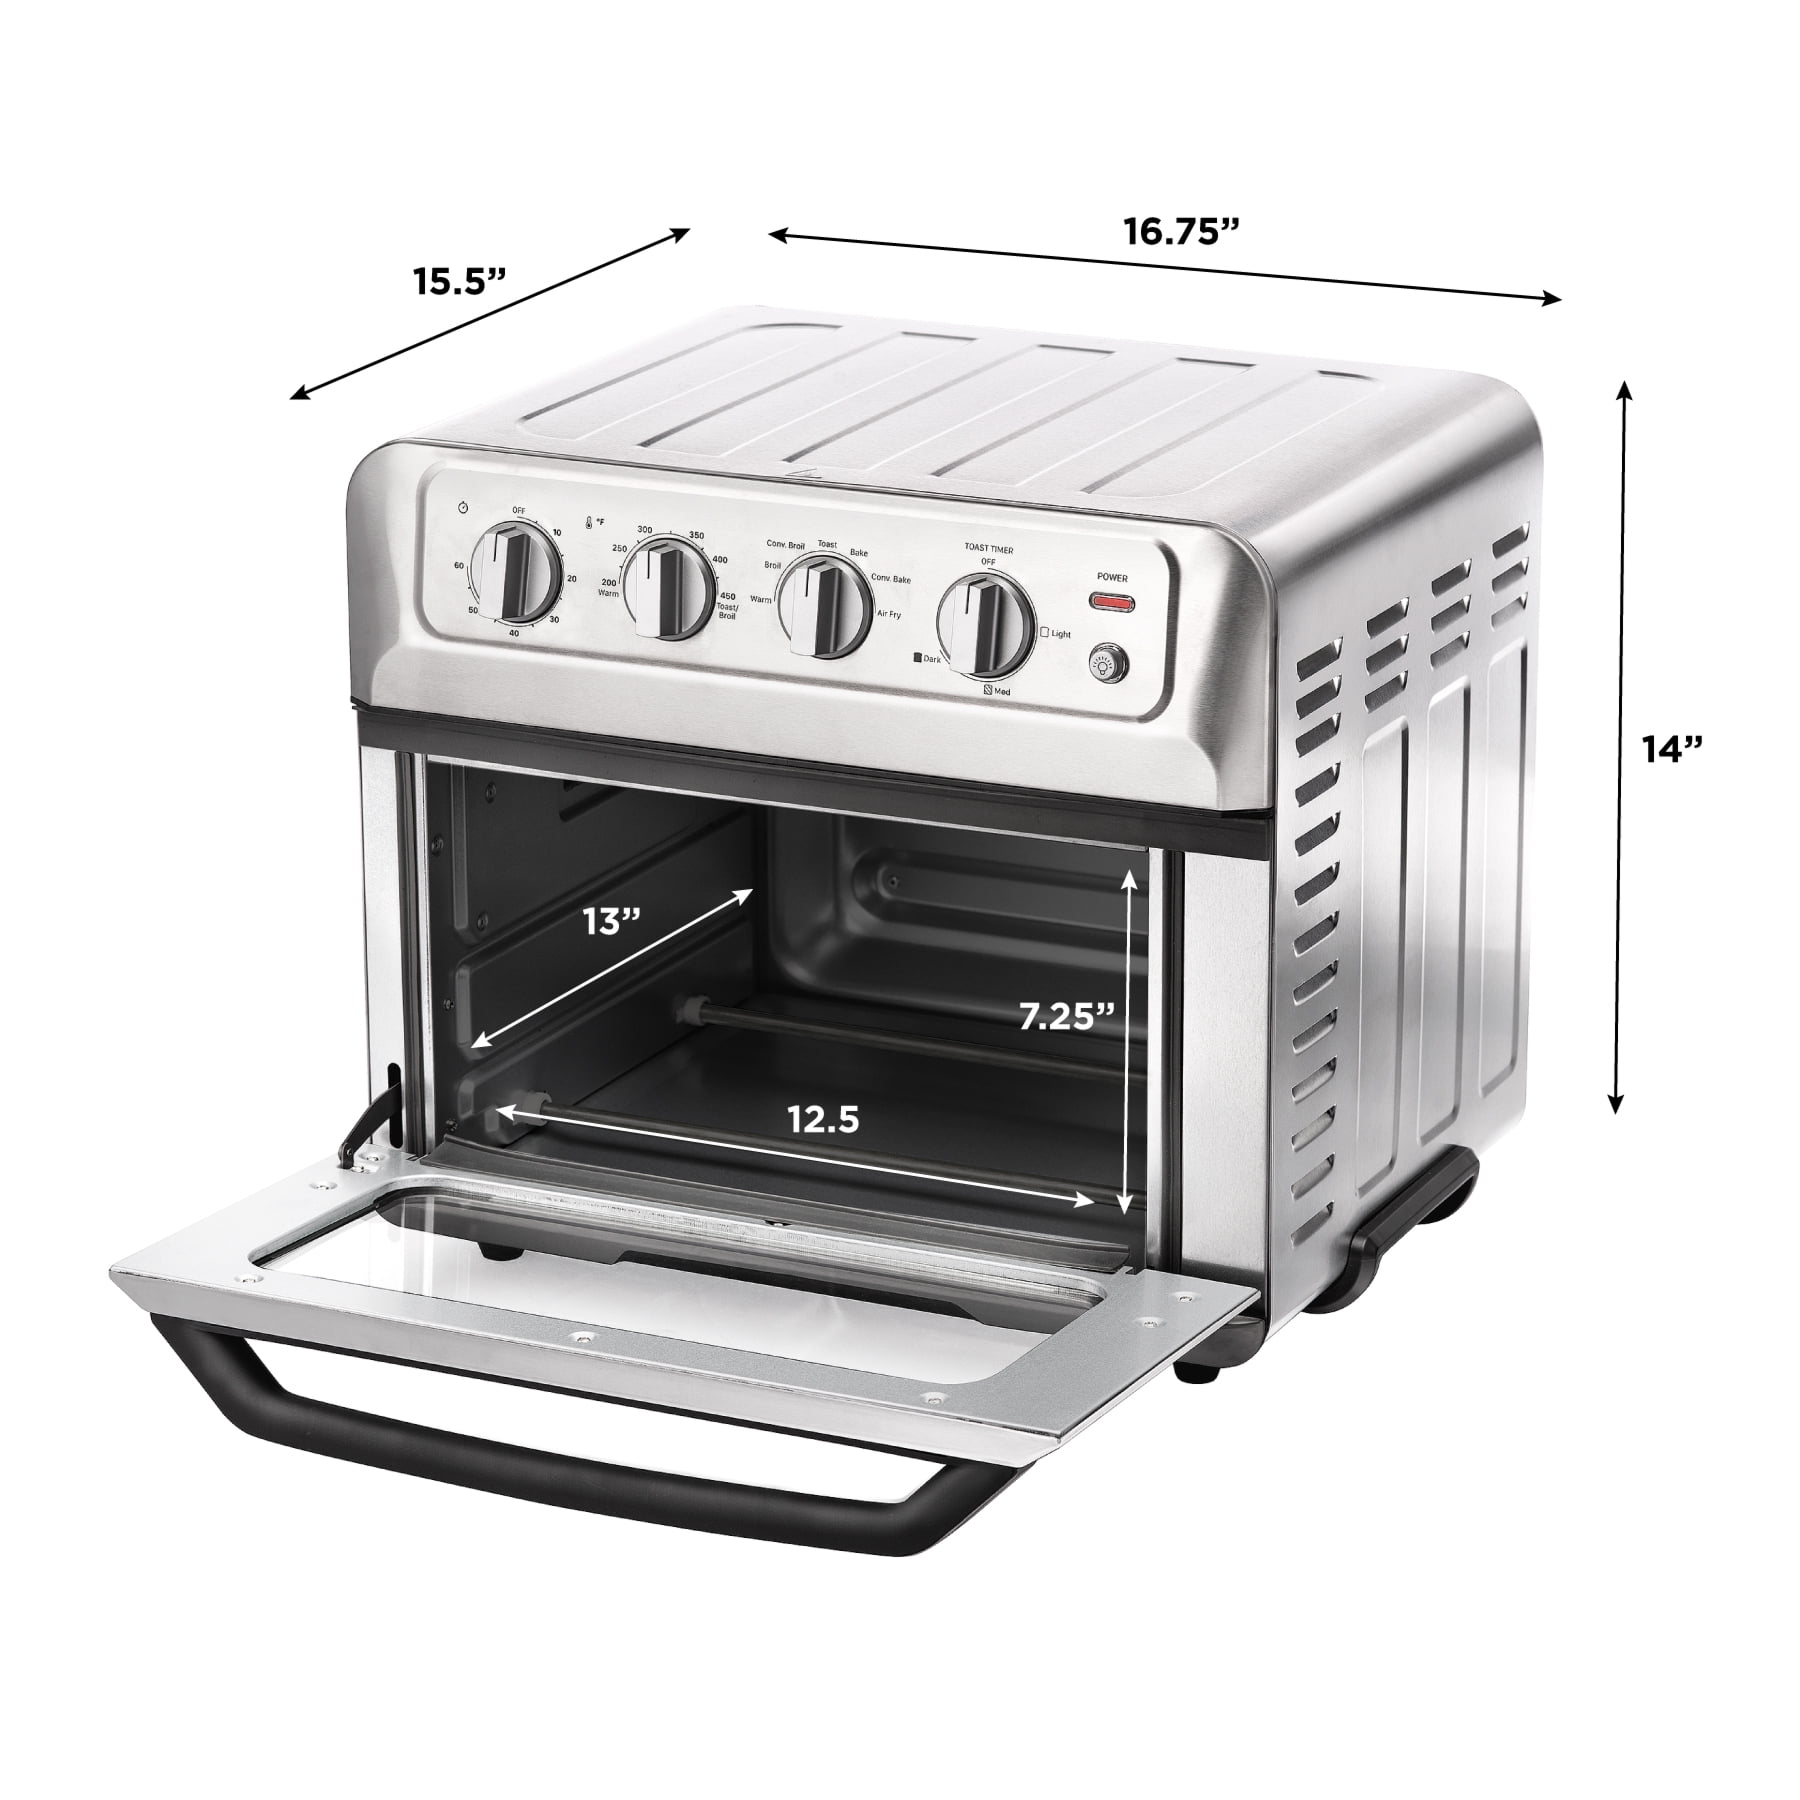 Chefman Toaster Oven, 1800W, 4-Slices of Toast, Black Stainless Steel,  Toast-Air Touch Air Fryer Plus Oven, 21 Qt. RJ50-SS-T-BLACK - The Home Depot